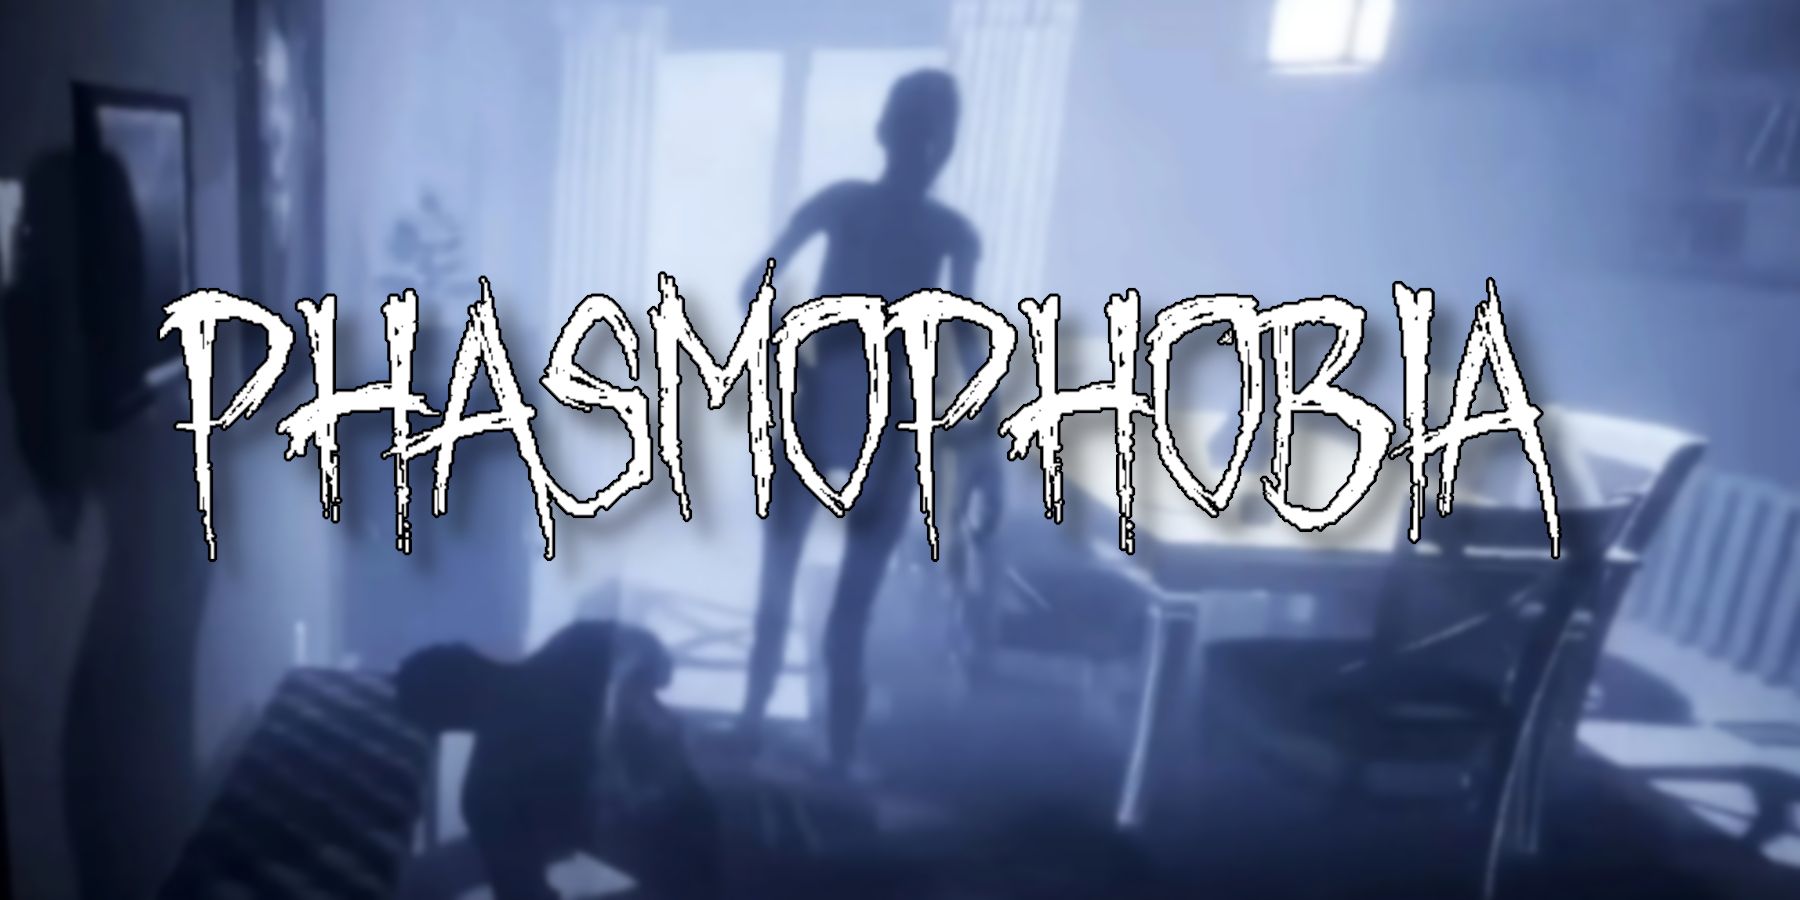 The Phasmophobia logo with an image of a ghostly silhouette in a dining room.